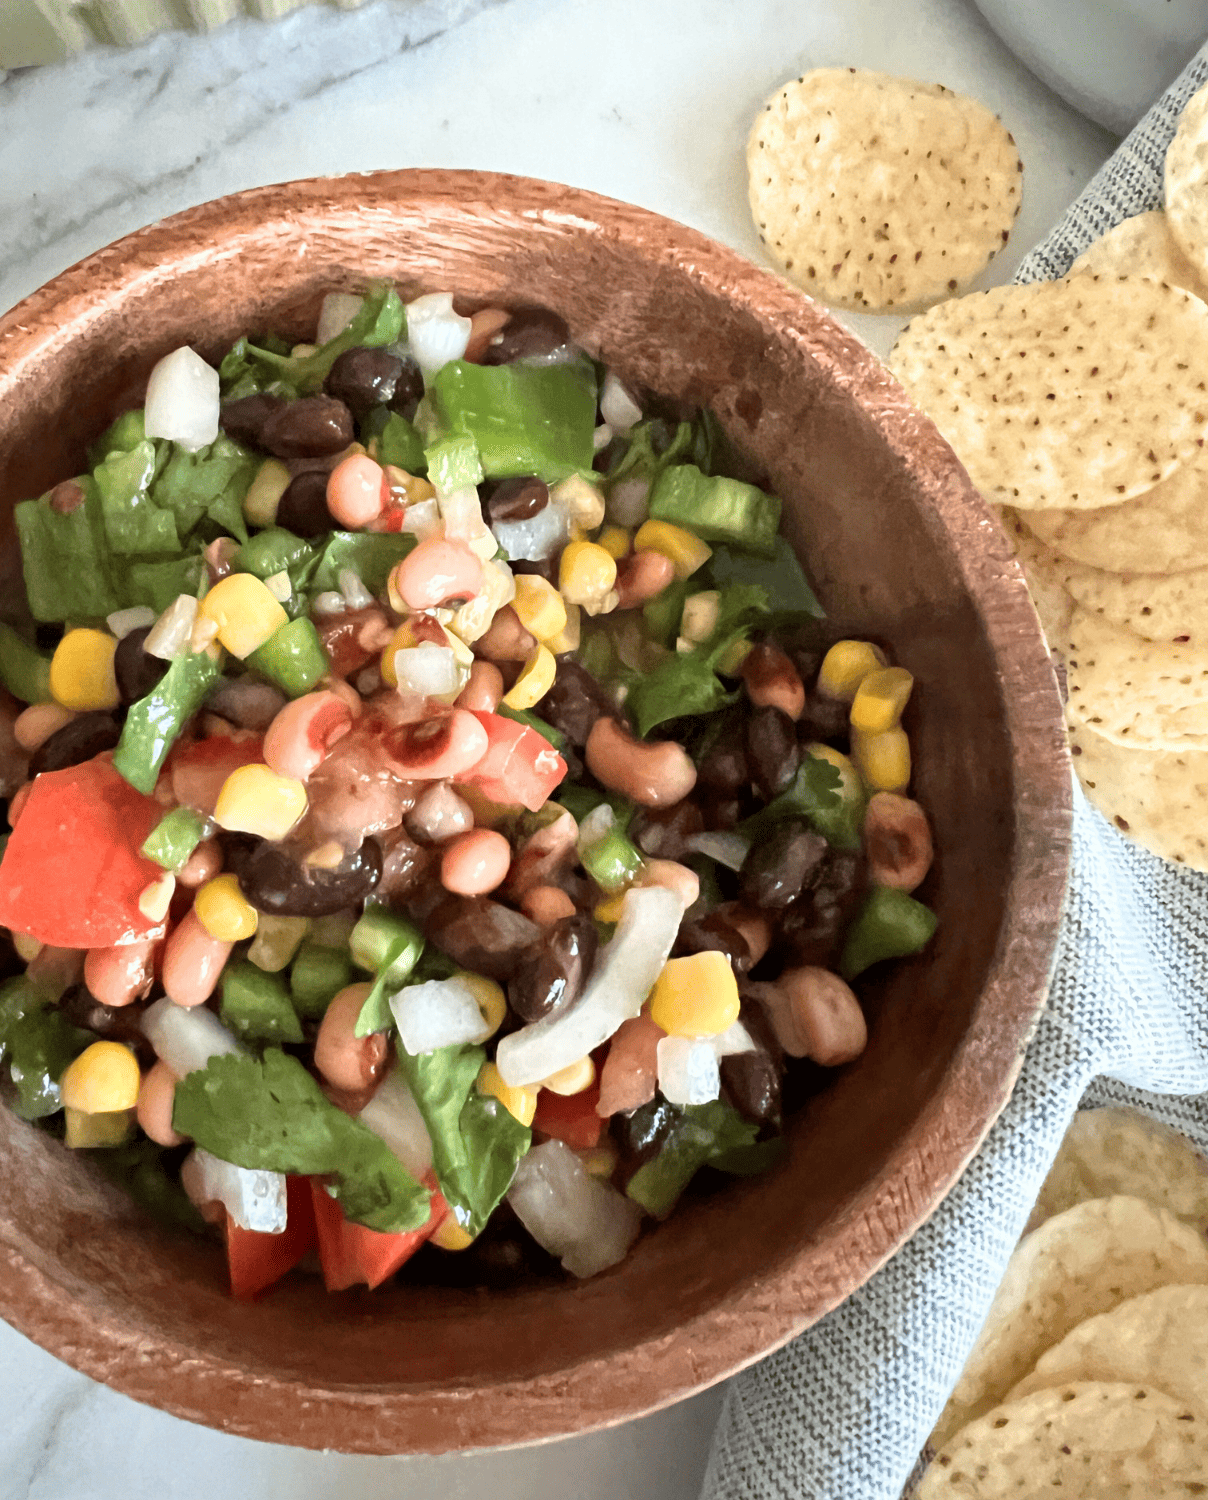 Cowboy caviar in a brown bowl next to some tortilla chips. 